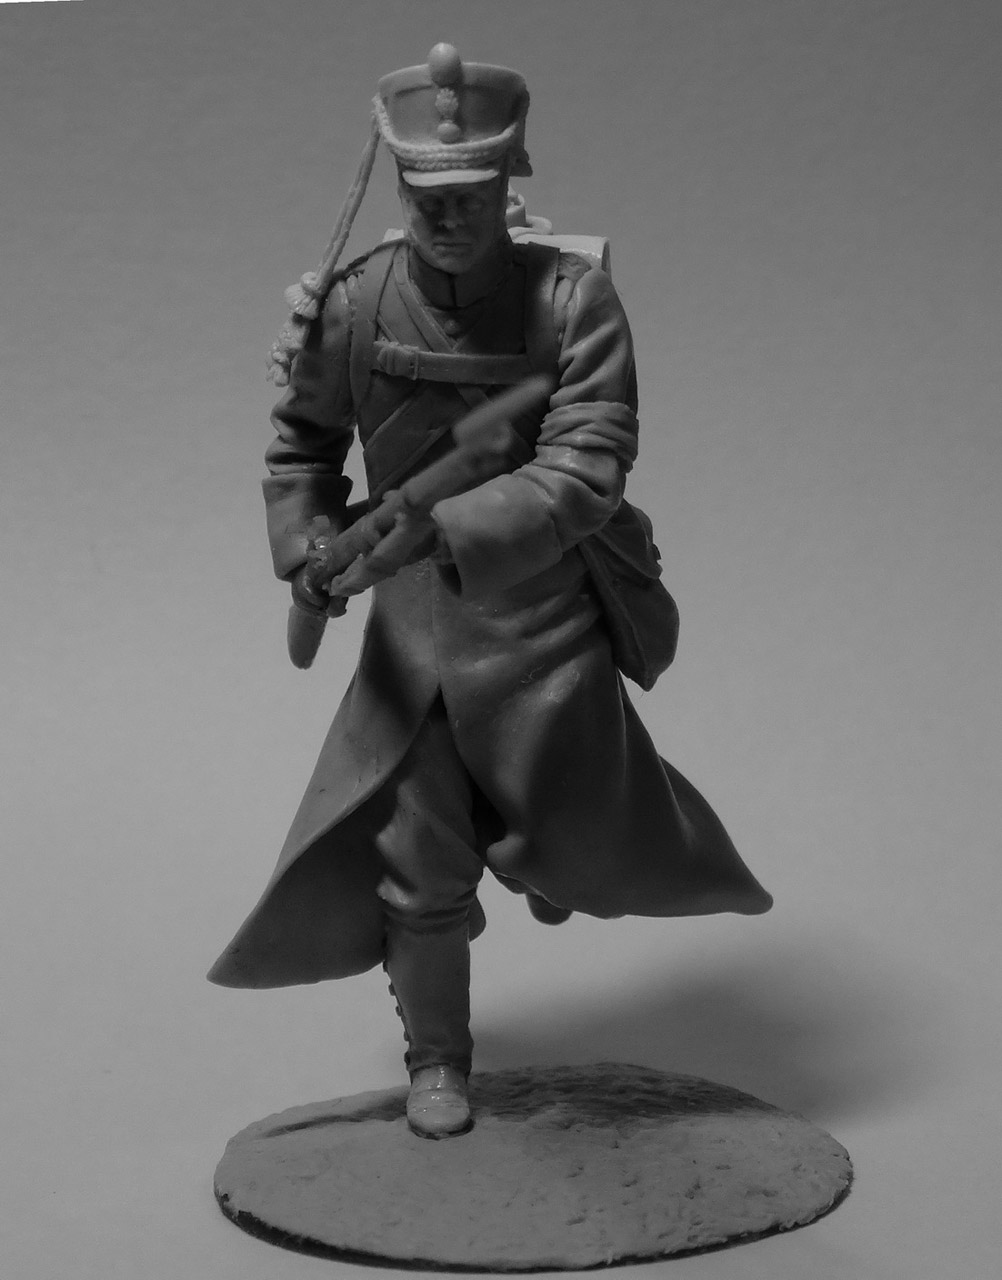 Sculpture: Private, 19th chasseurs, in winter uniform, March 1814, photo #3